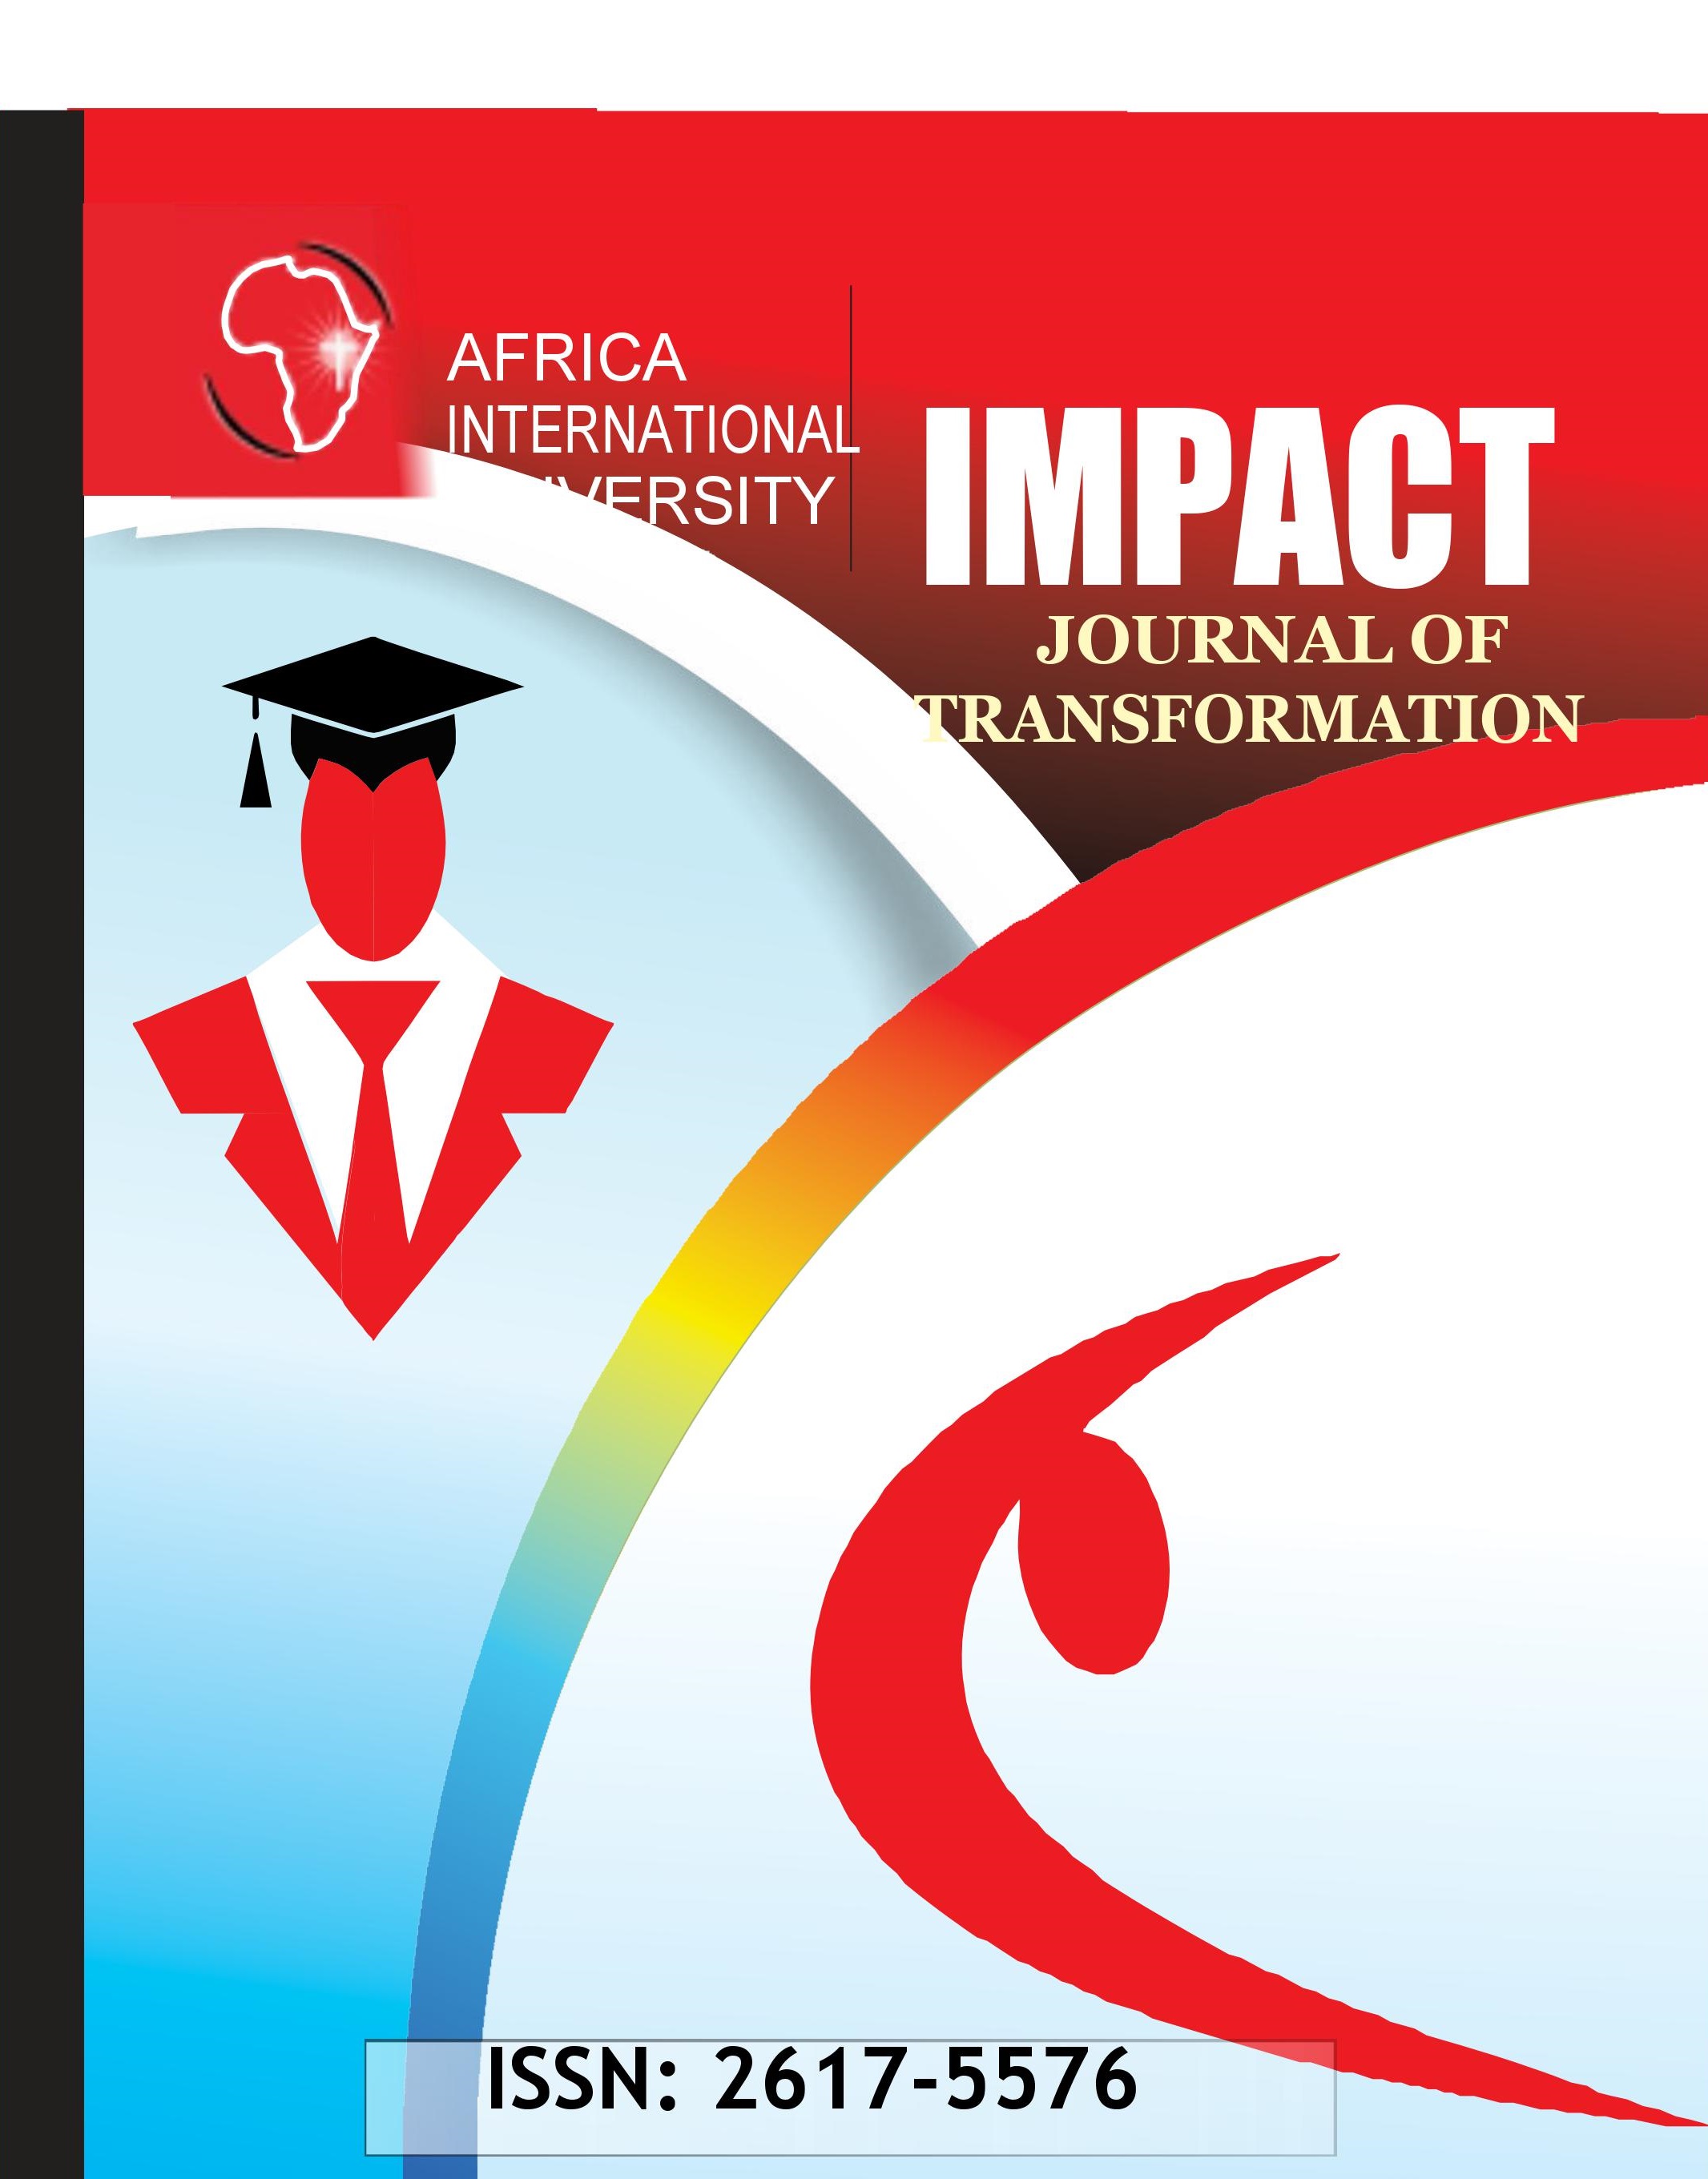 					View Vol. 2 No. 1 (2019): Impact: Journal of Transformation
				